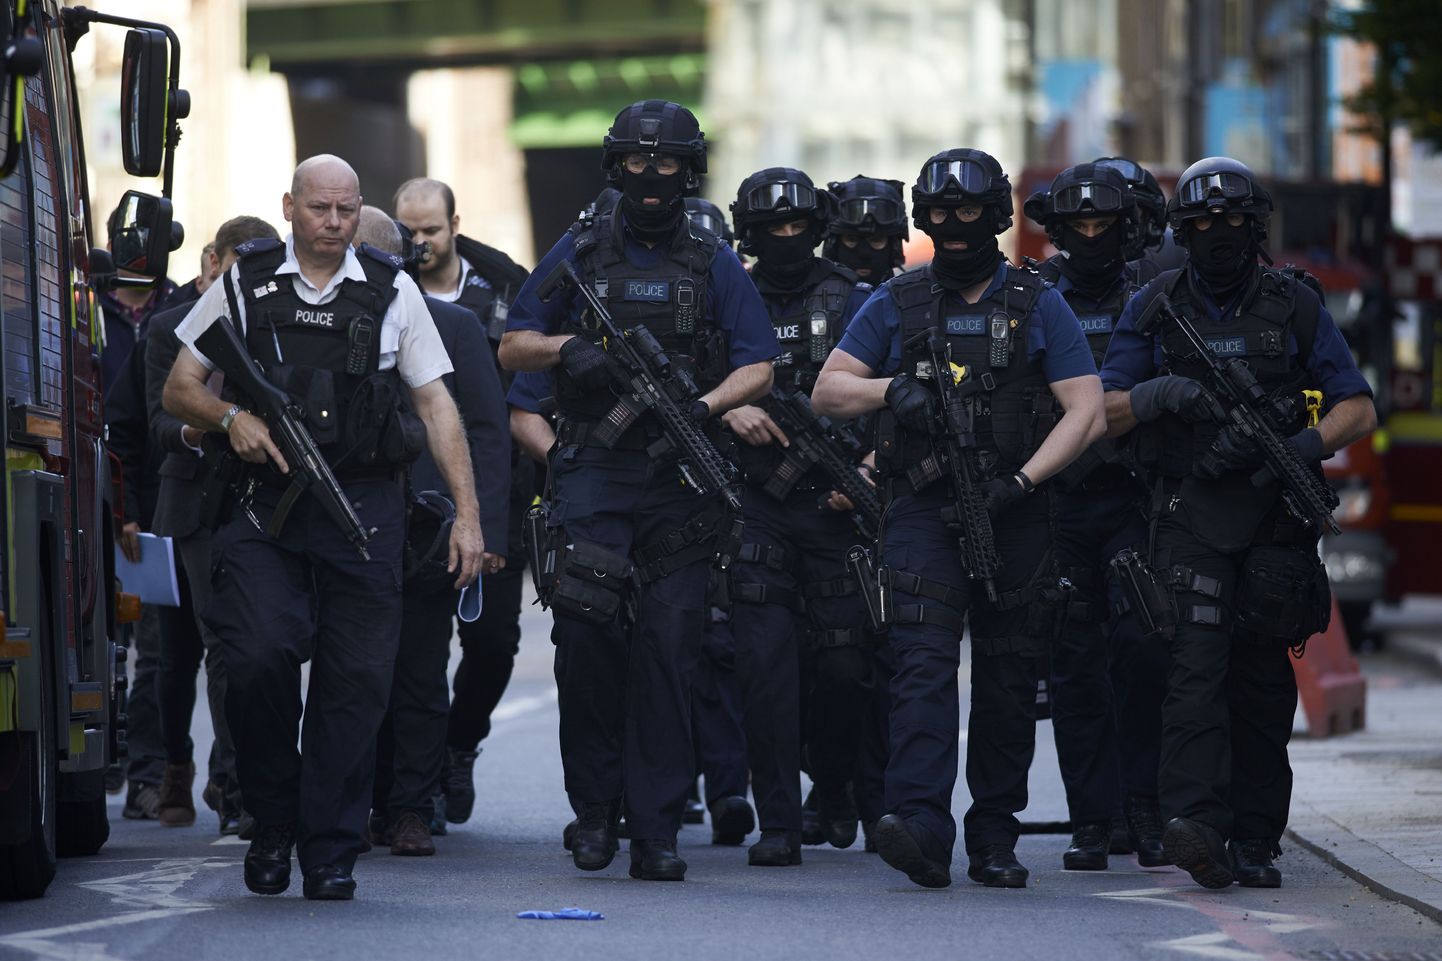 TOPSHOT - Armed police officers arrive at The Shard in the London Bridge quarter in London on June 4, 2017, following a terror attack.
Forty-eight people have been taken to hospital after a terror attack in central London in which six people died, the London Ambulance Service said Sunday. / AFP PHOTO / NIKLAS HALLE'N